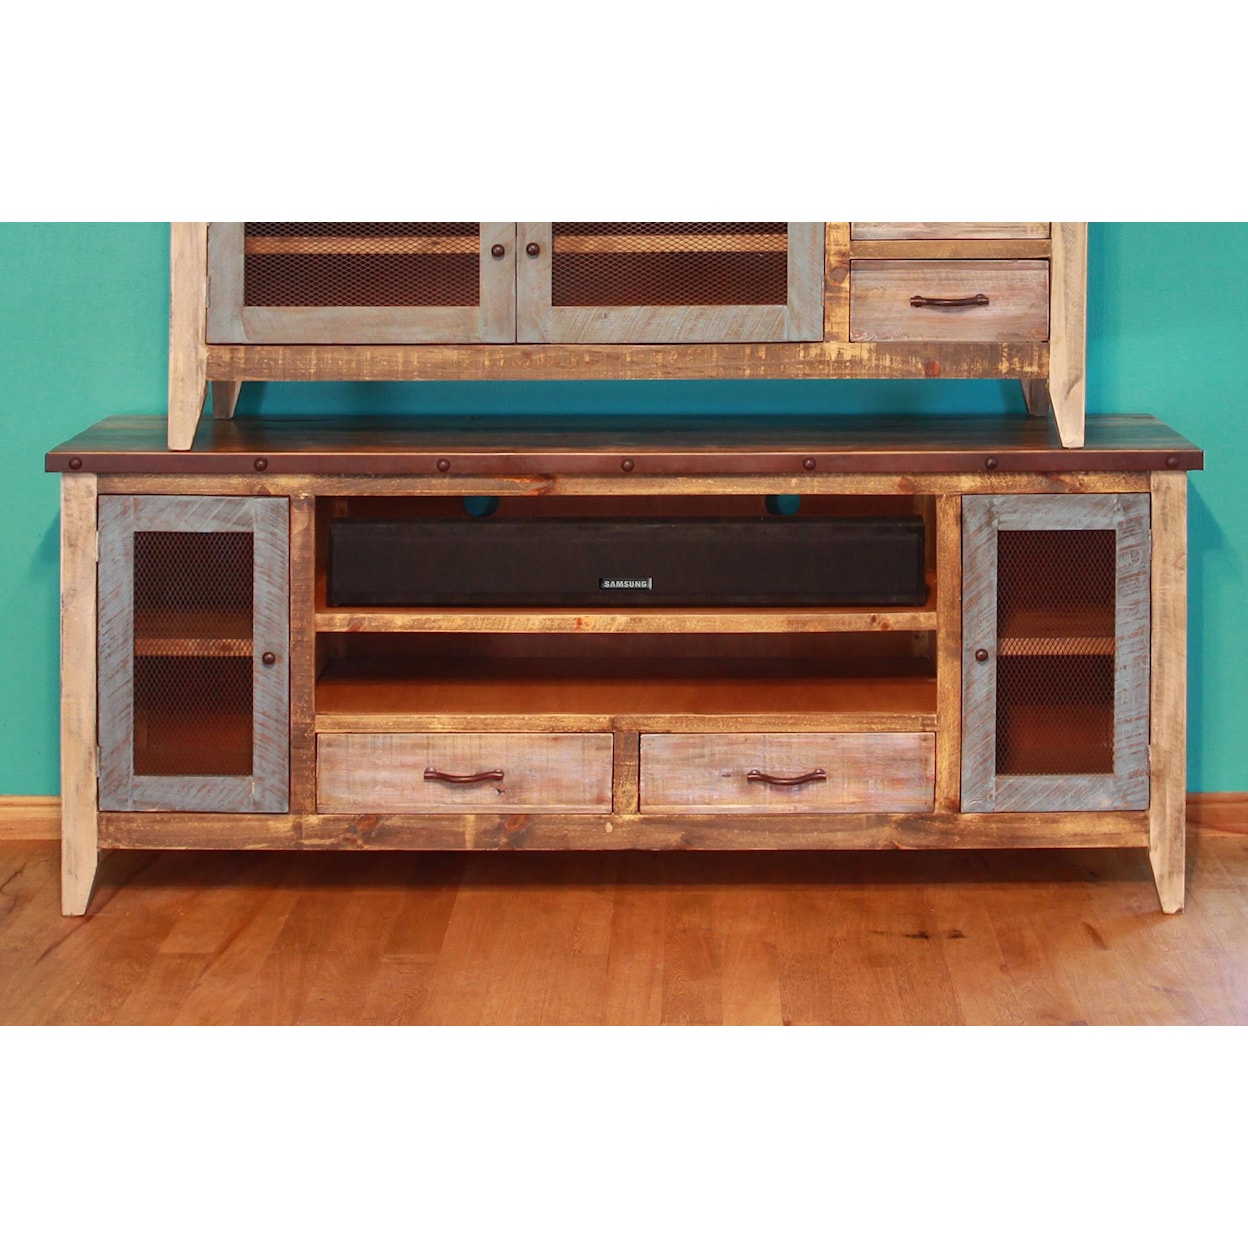 IFD 900 Antique Solid Pine 76" TV Stand